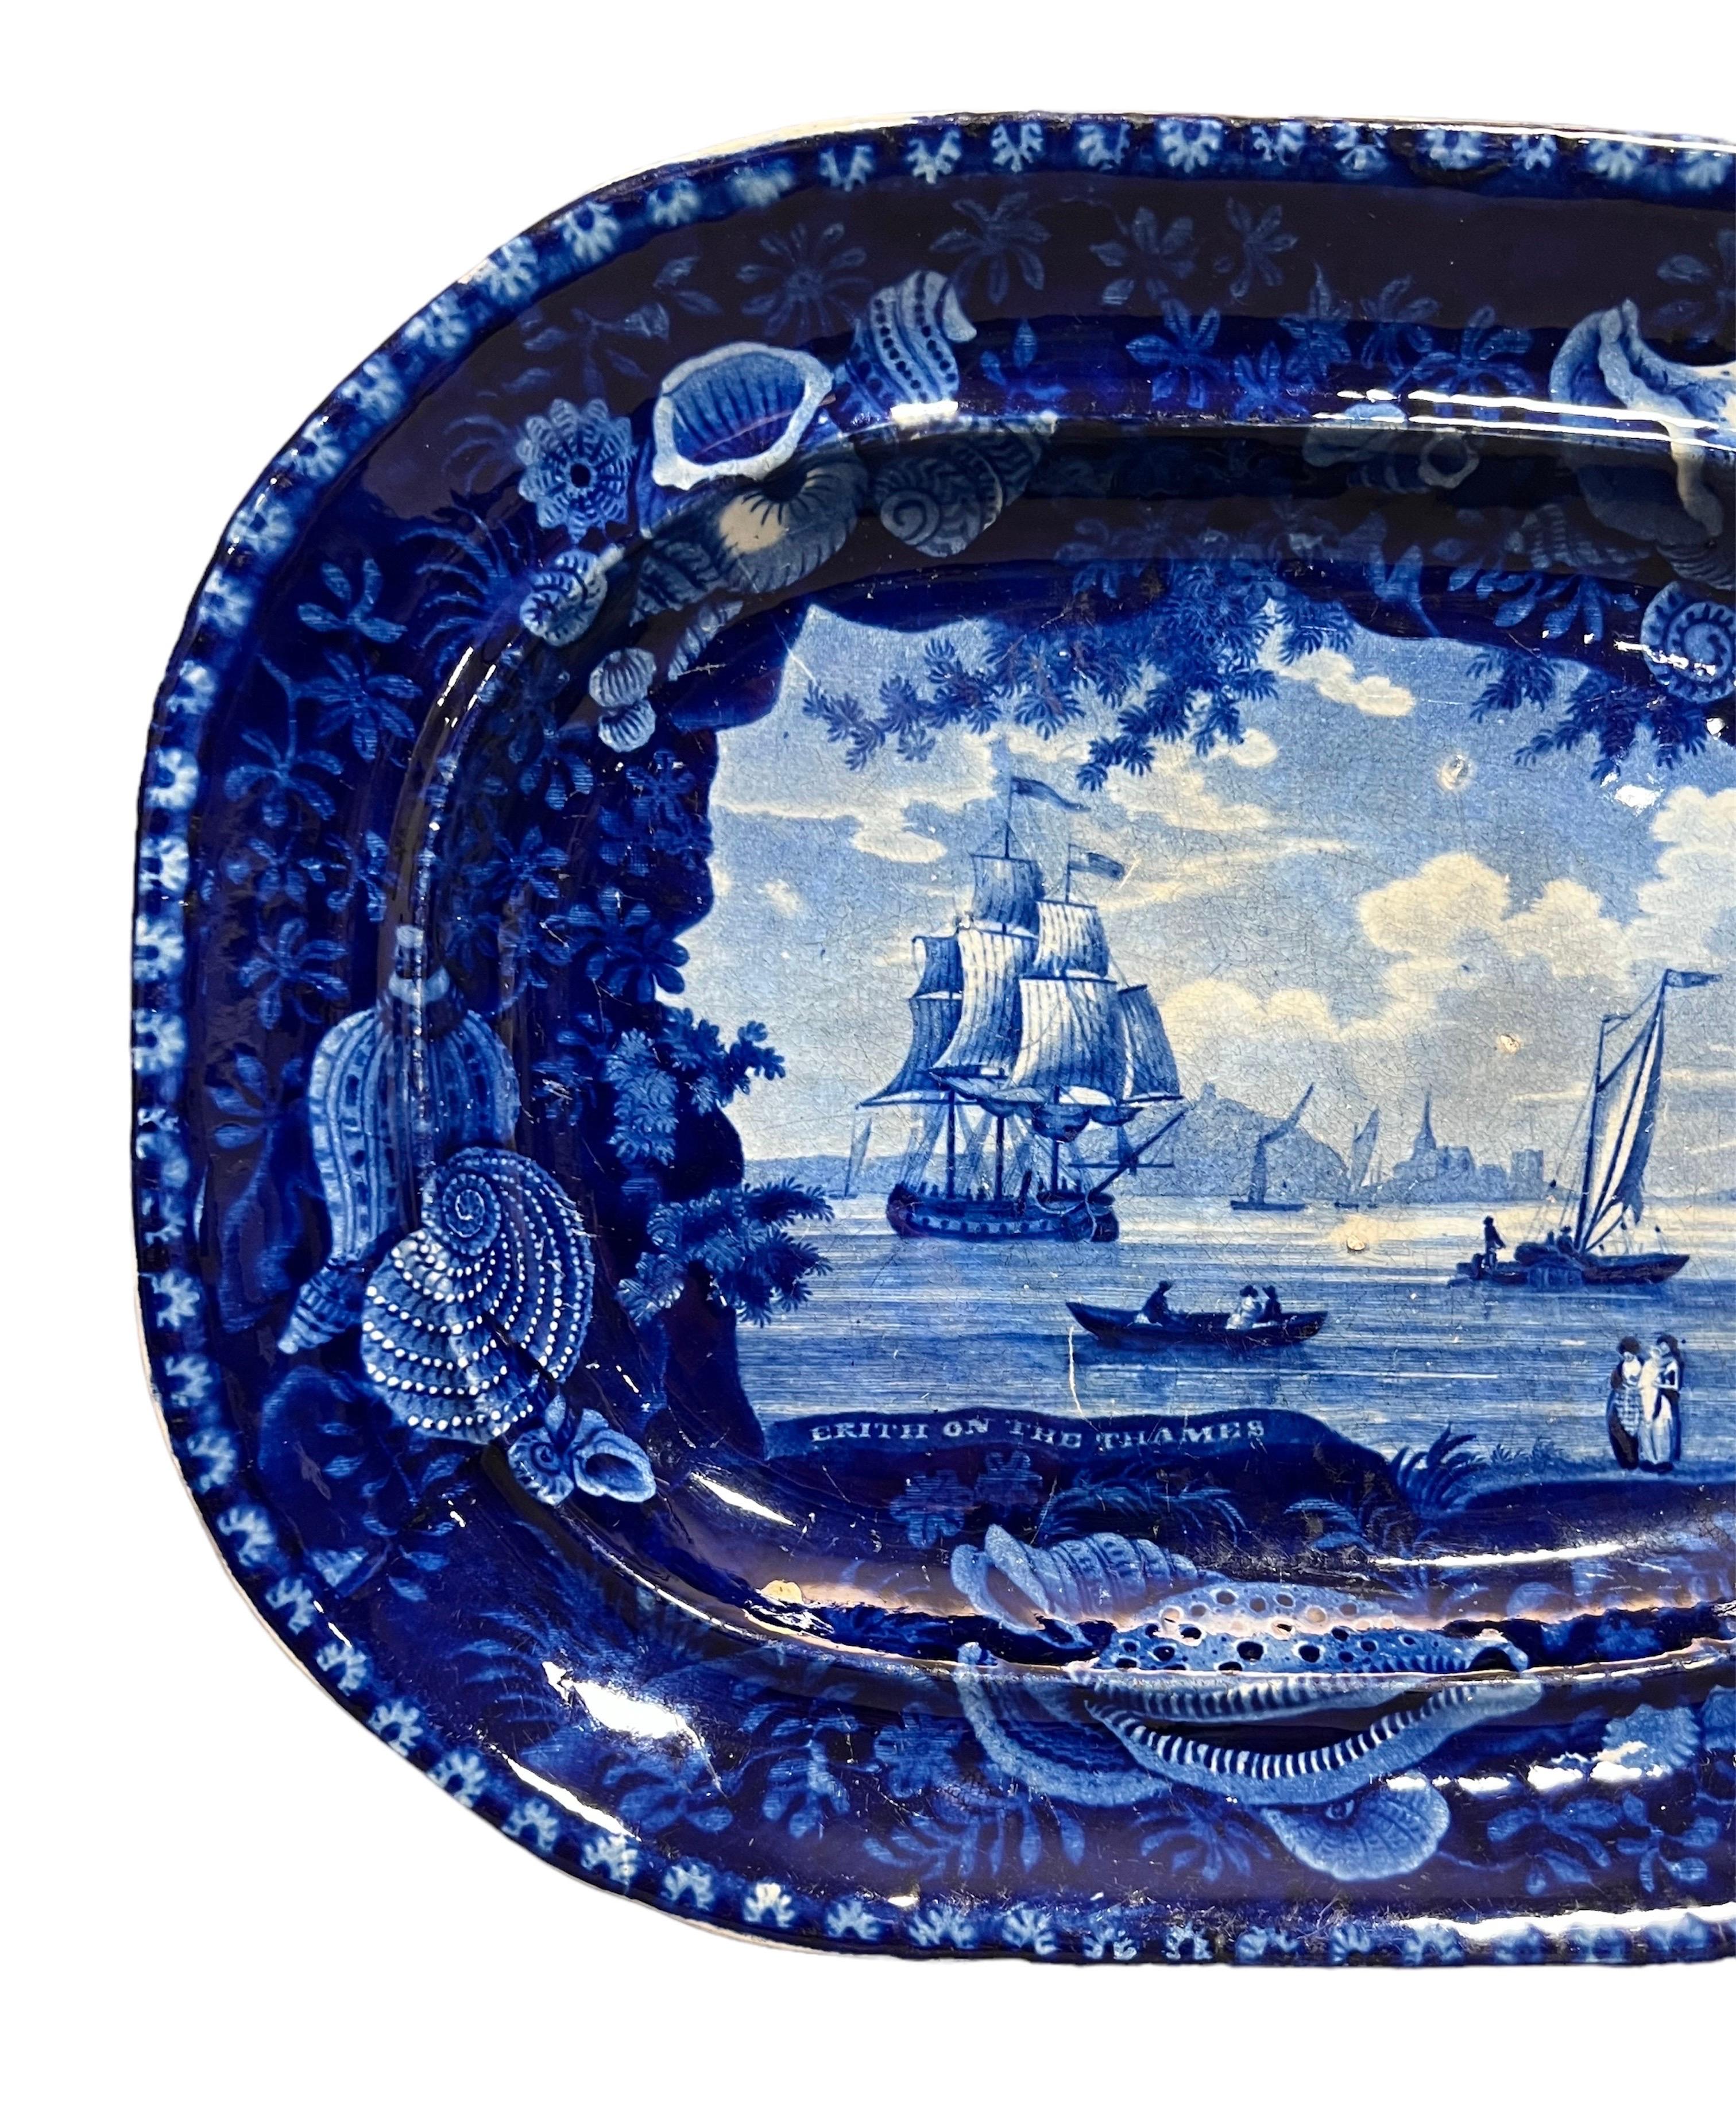 Early Victorian Staffordshire English View / Nautical Motif Transfer-Printed Ceramic Platter For Sale